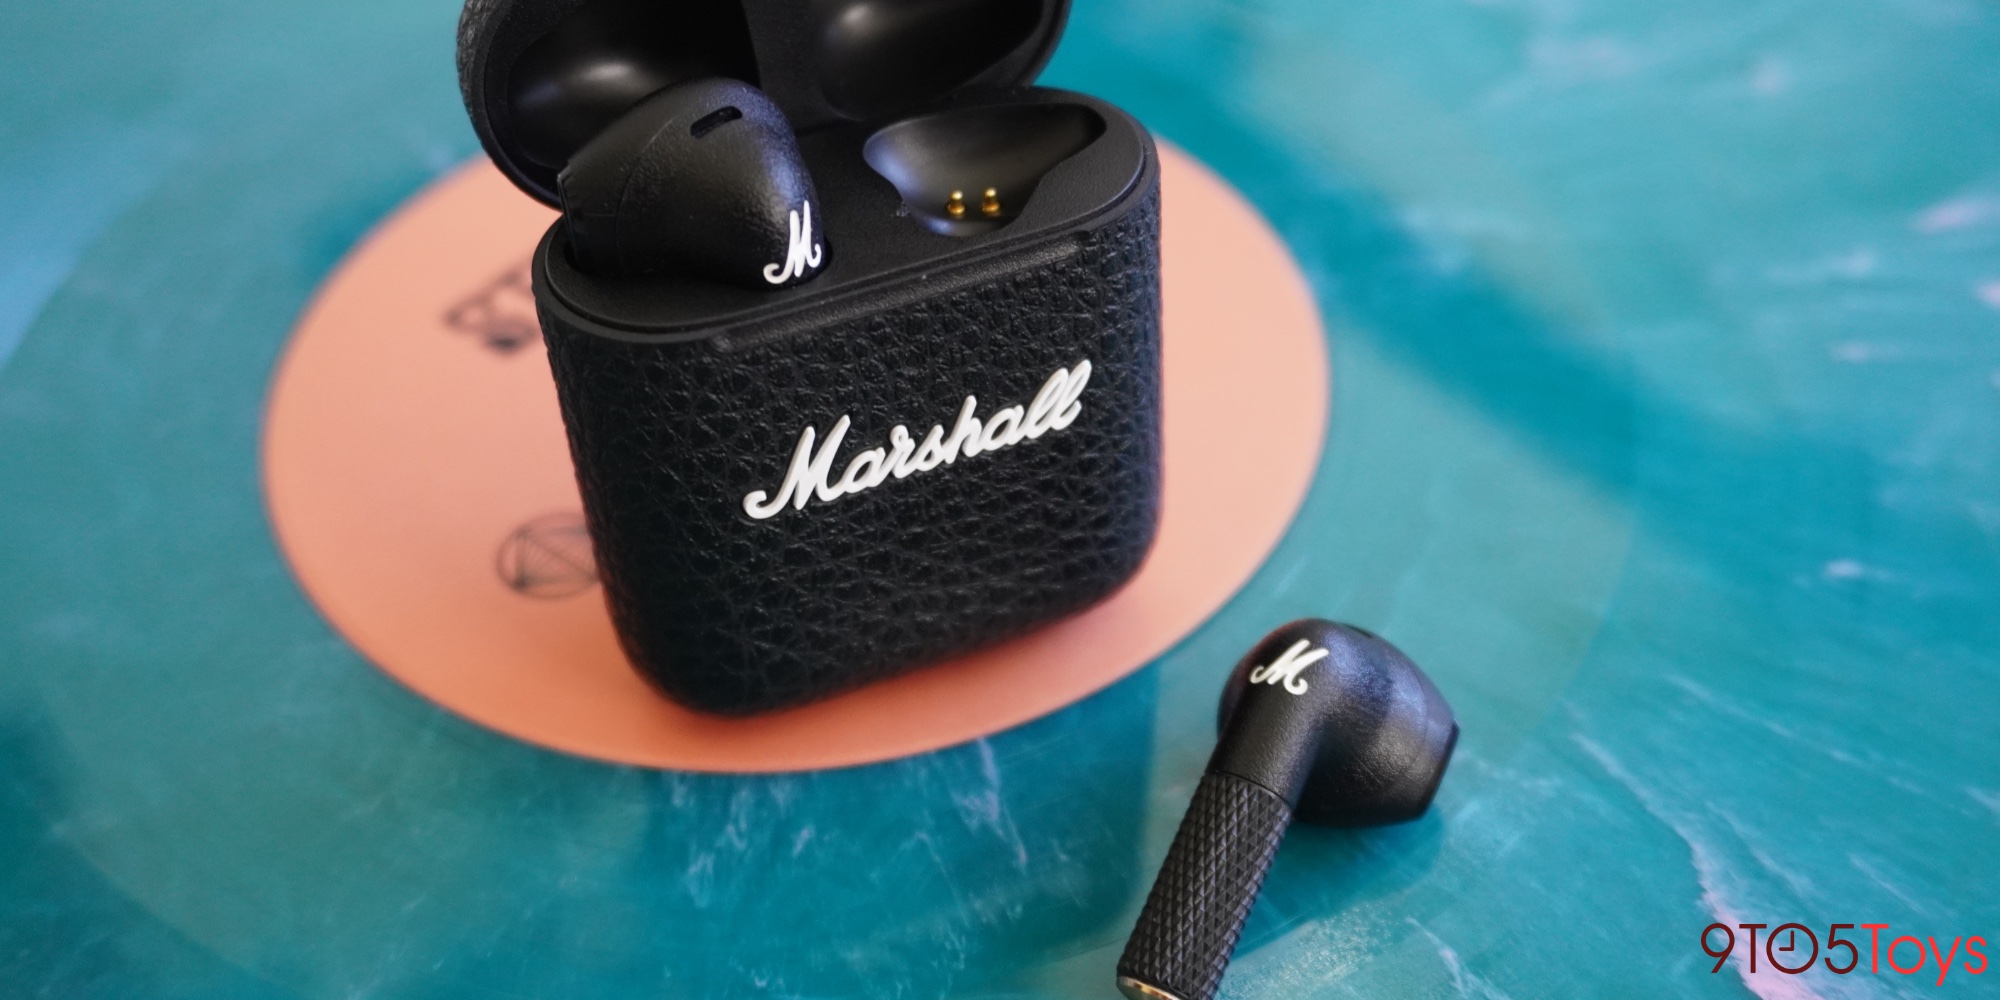 Marshall's AirPods Alternatives: Stylish, With Compromises